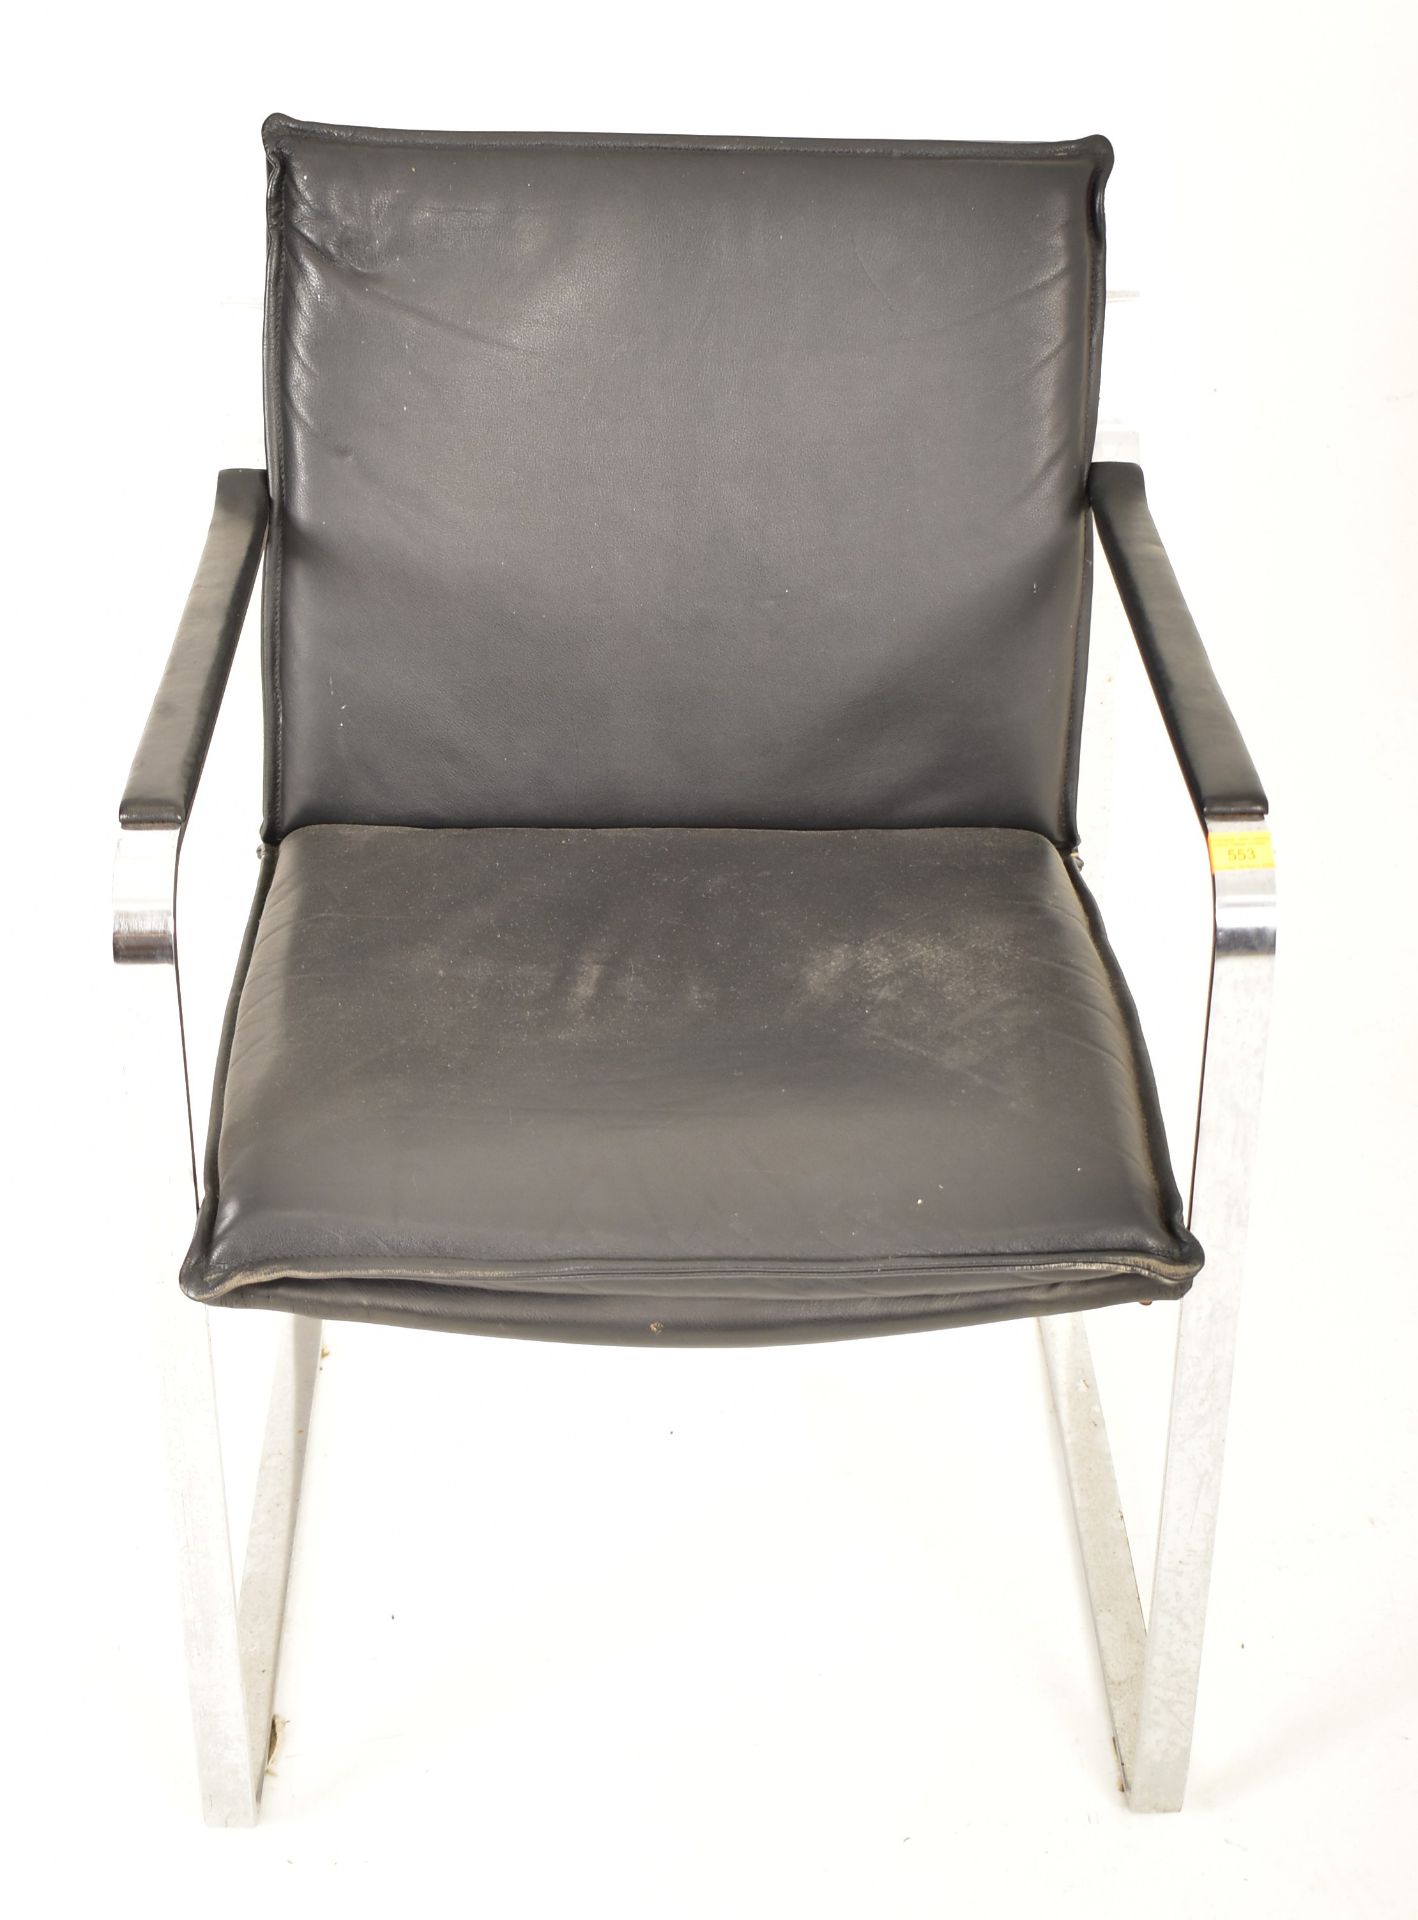 KNOLL - 20TH CENTURY POLISHED STEEL AND LEATHER ARMCHAIR - Image 2 of 5